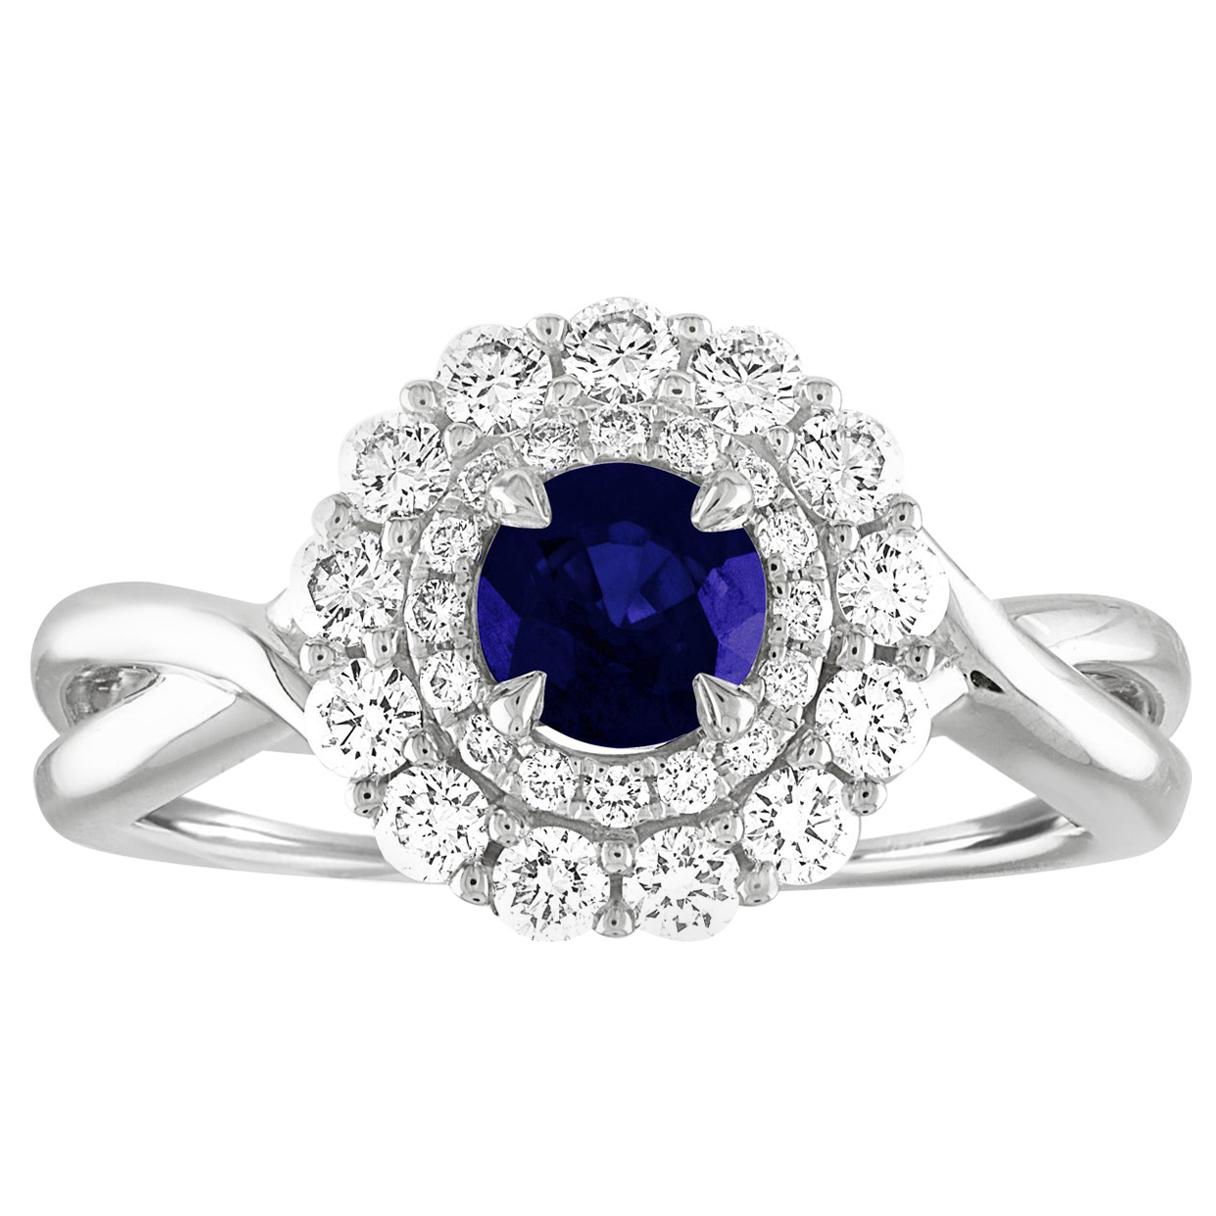 AGL Certified 0.84 Carat Round Sapphire Diamond Gold Ring For Sale